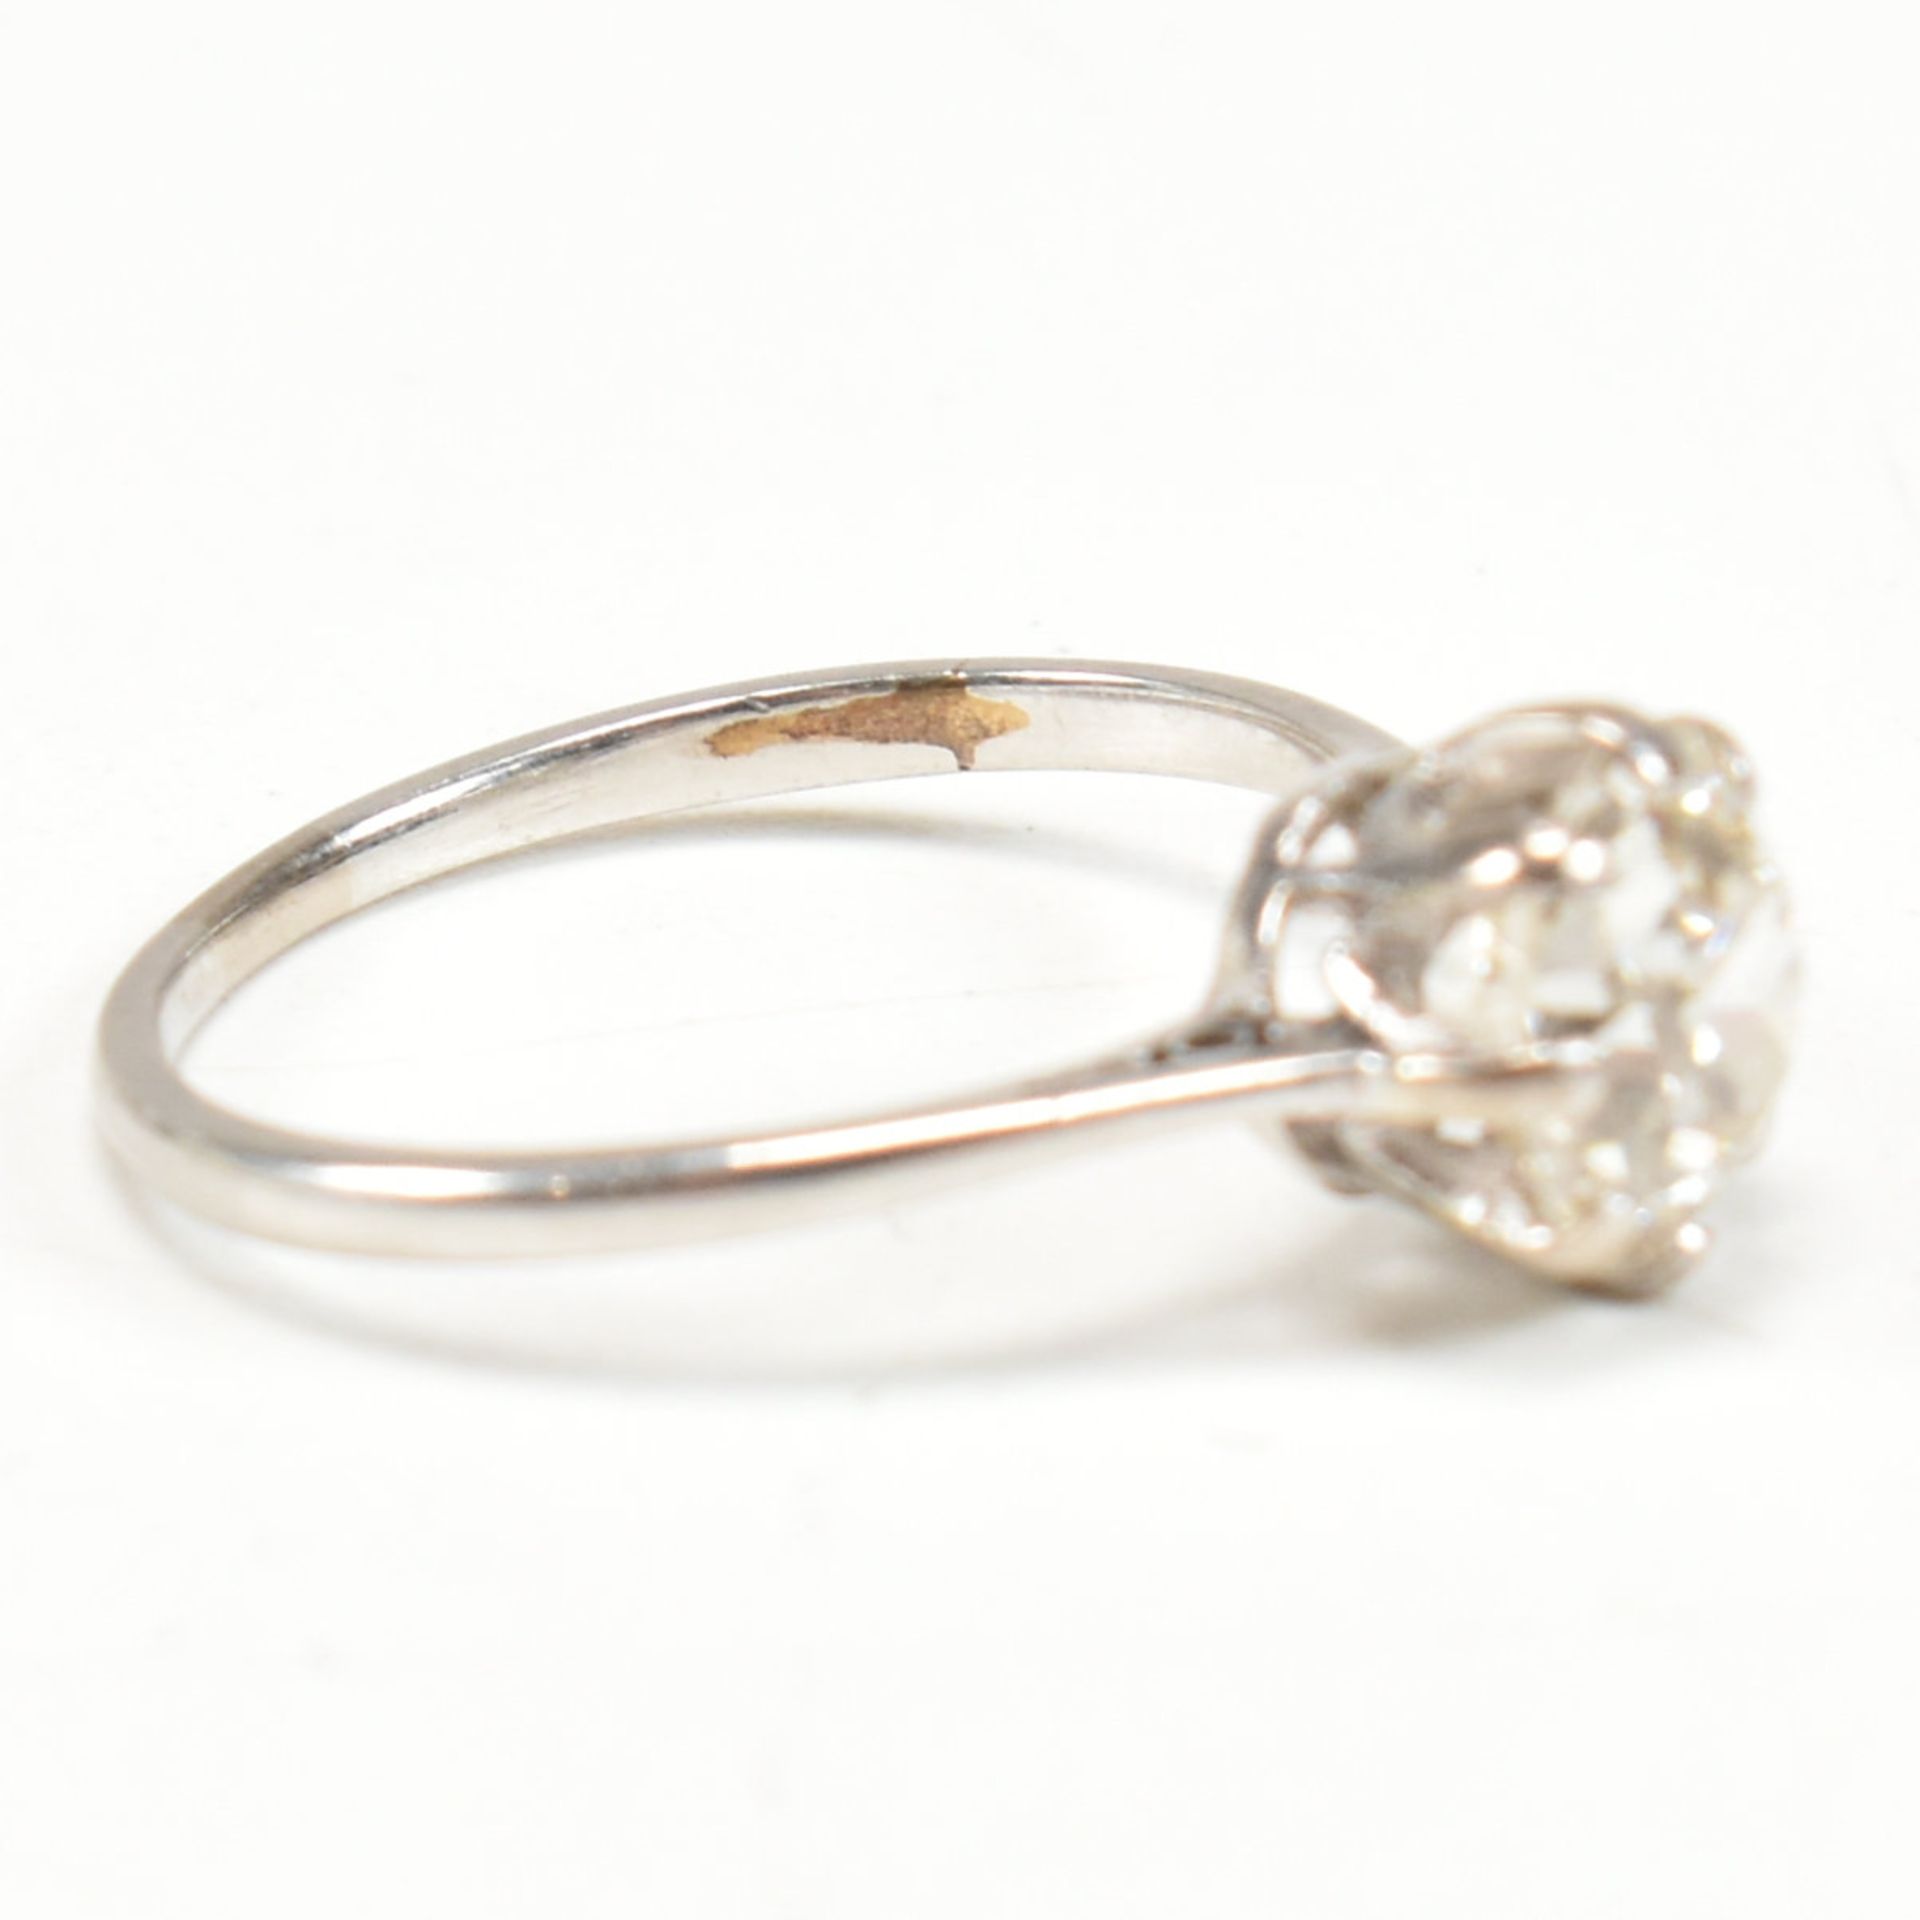 1930S 1.7CT DIAMOND SOLITAIRE RING - Image 4 of 9